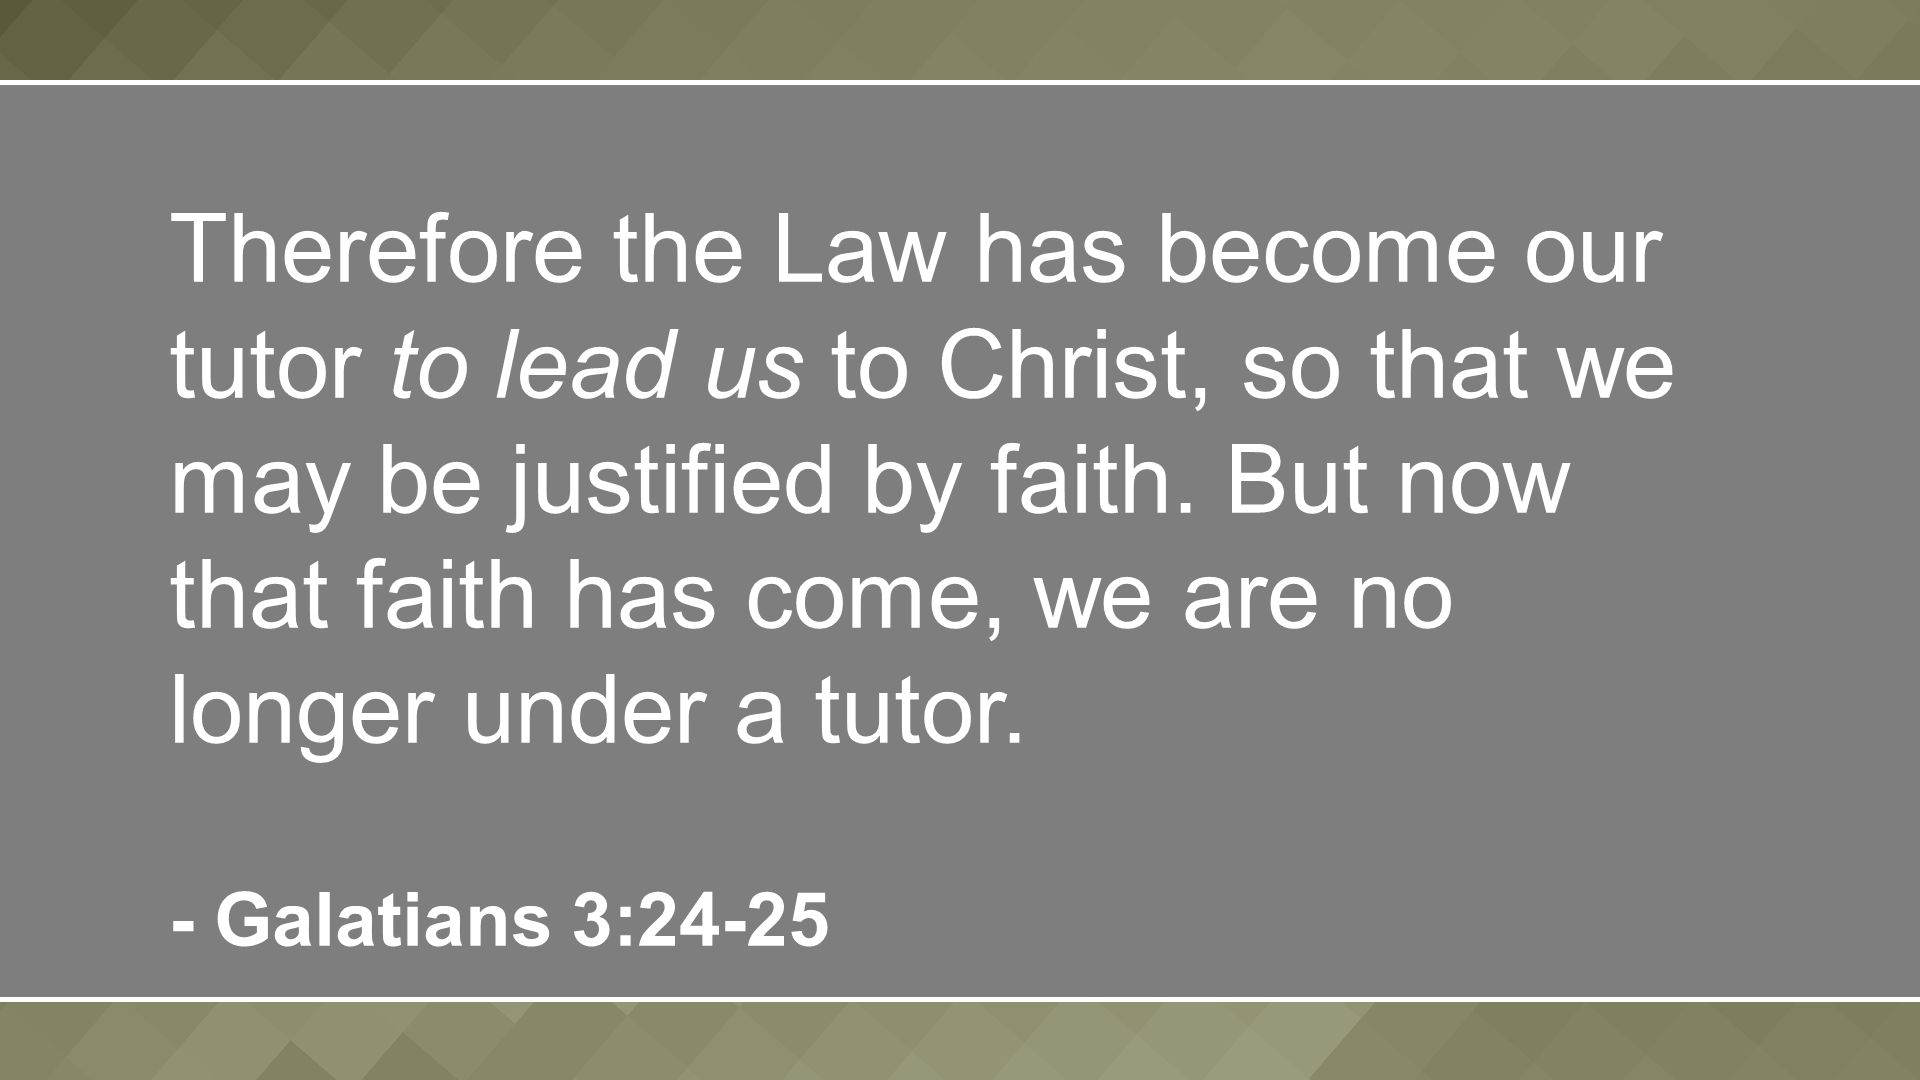 Therefore the Law has become our tutor to lead us to Christ, so that we may be justified by faith.